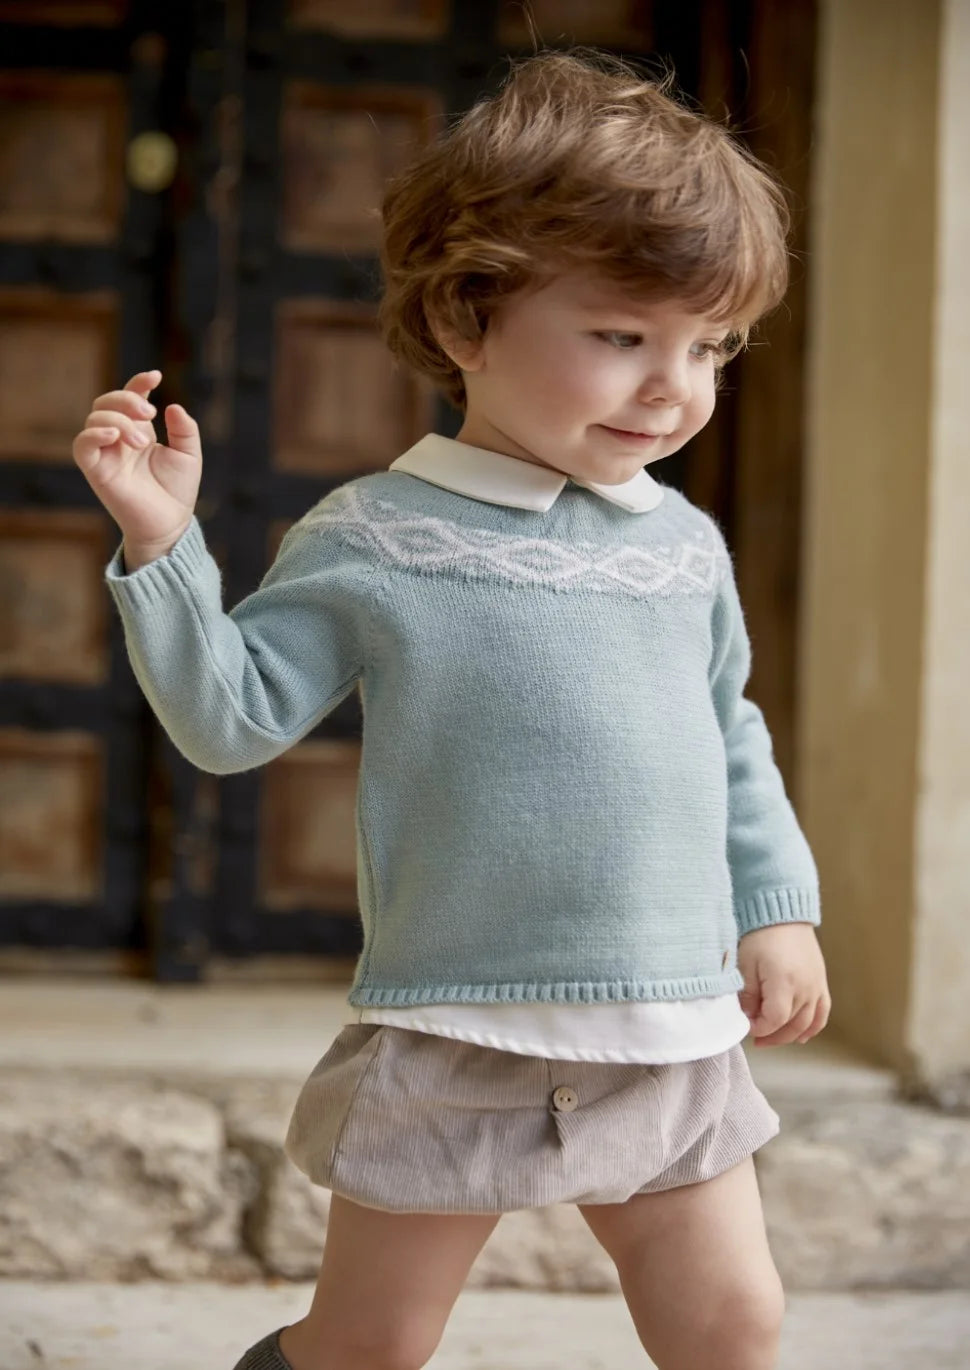 Javier jumper set from tors childrens wear aw23 collection by martin aranda